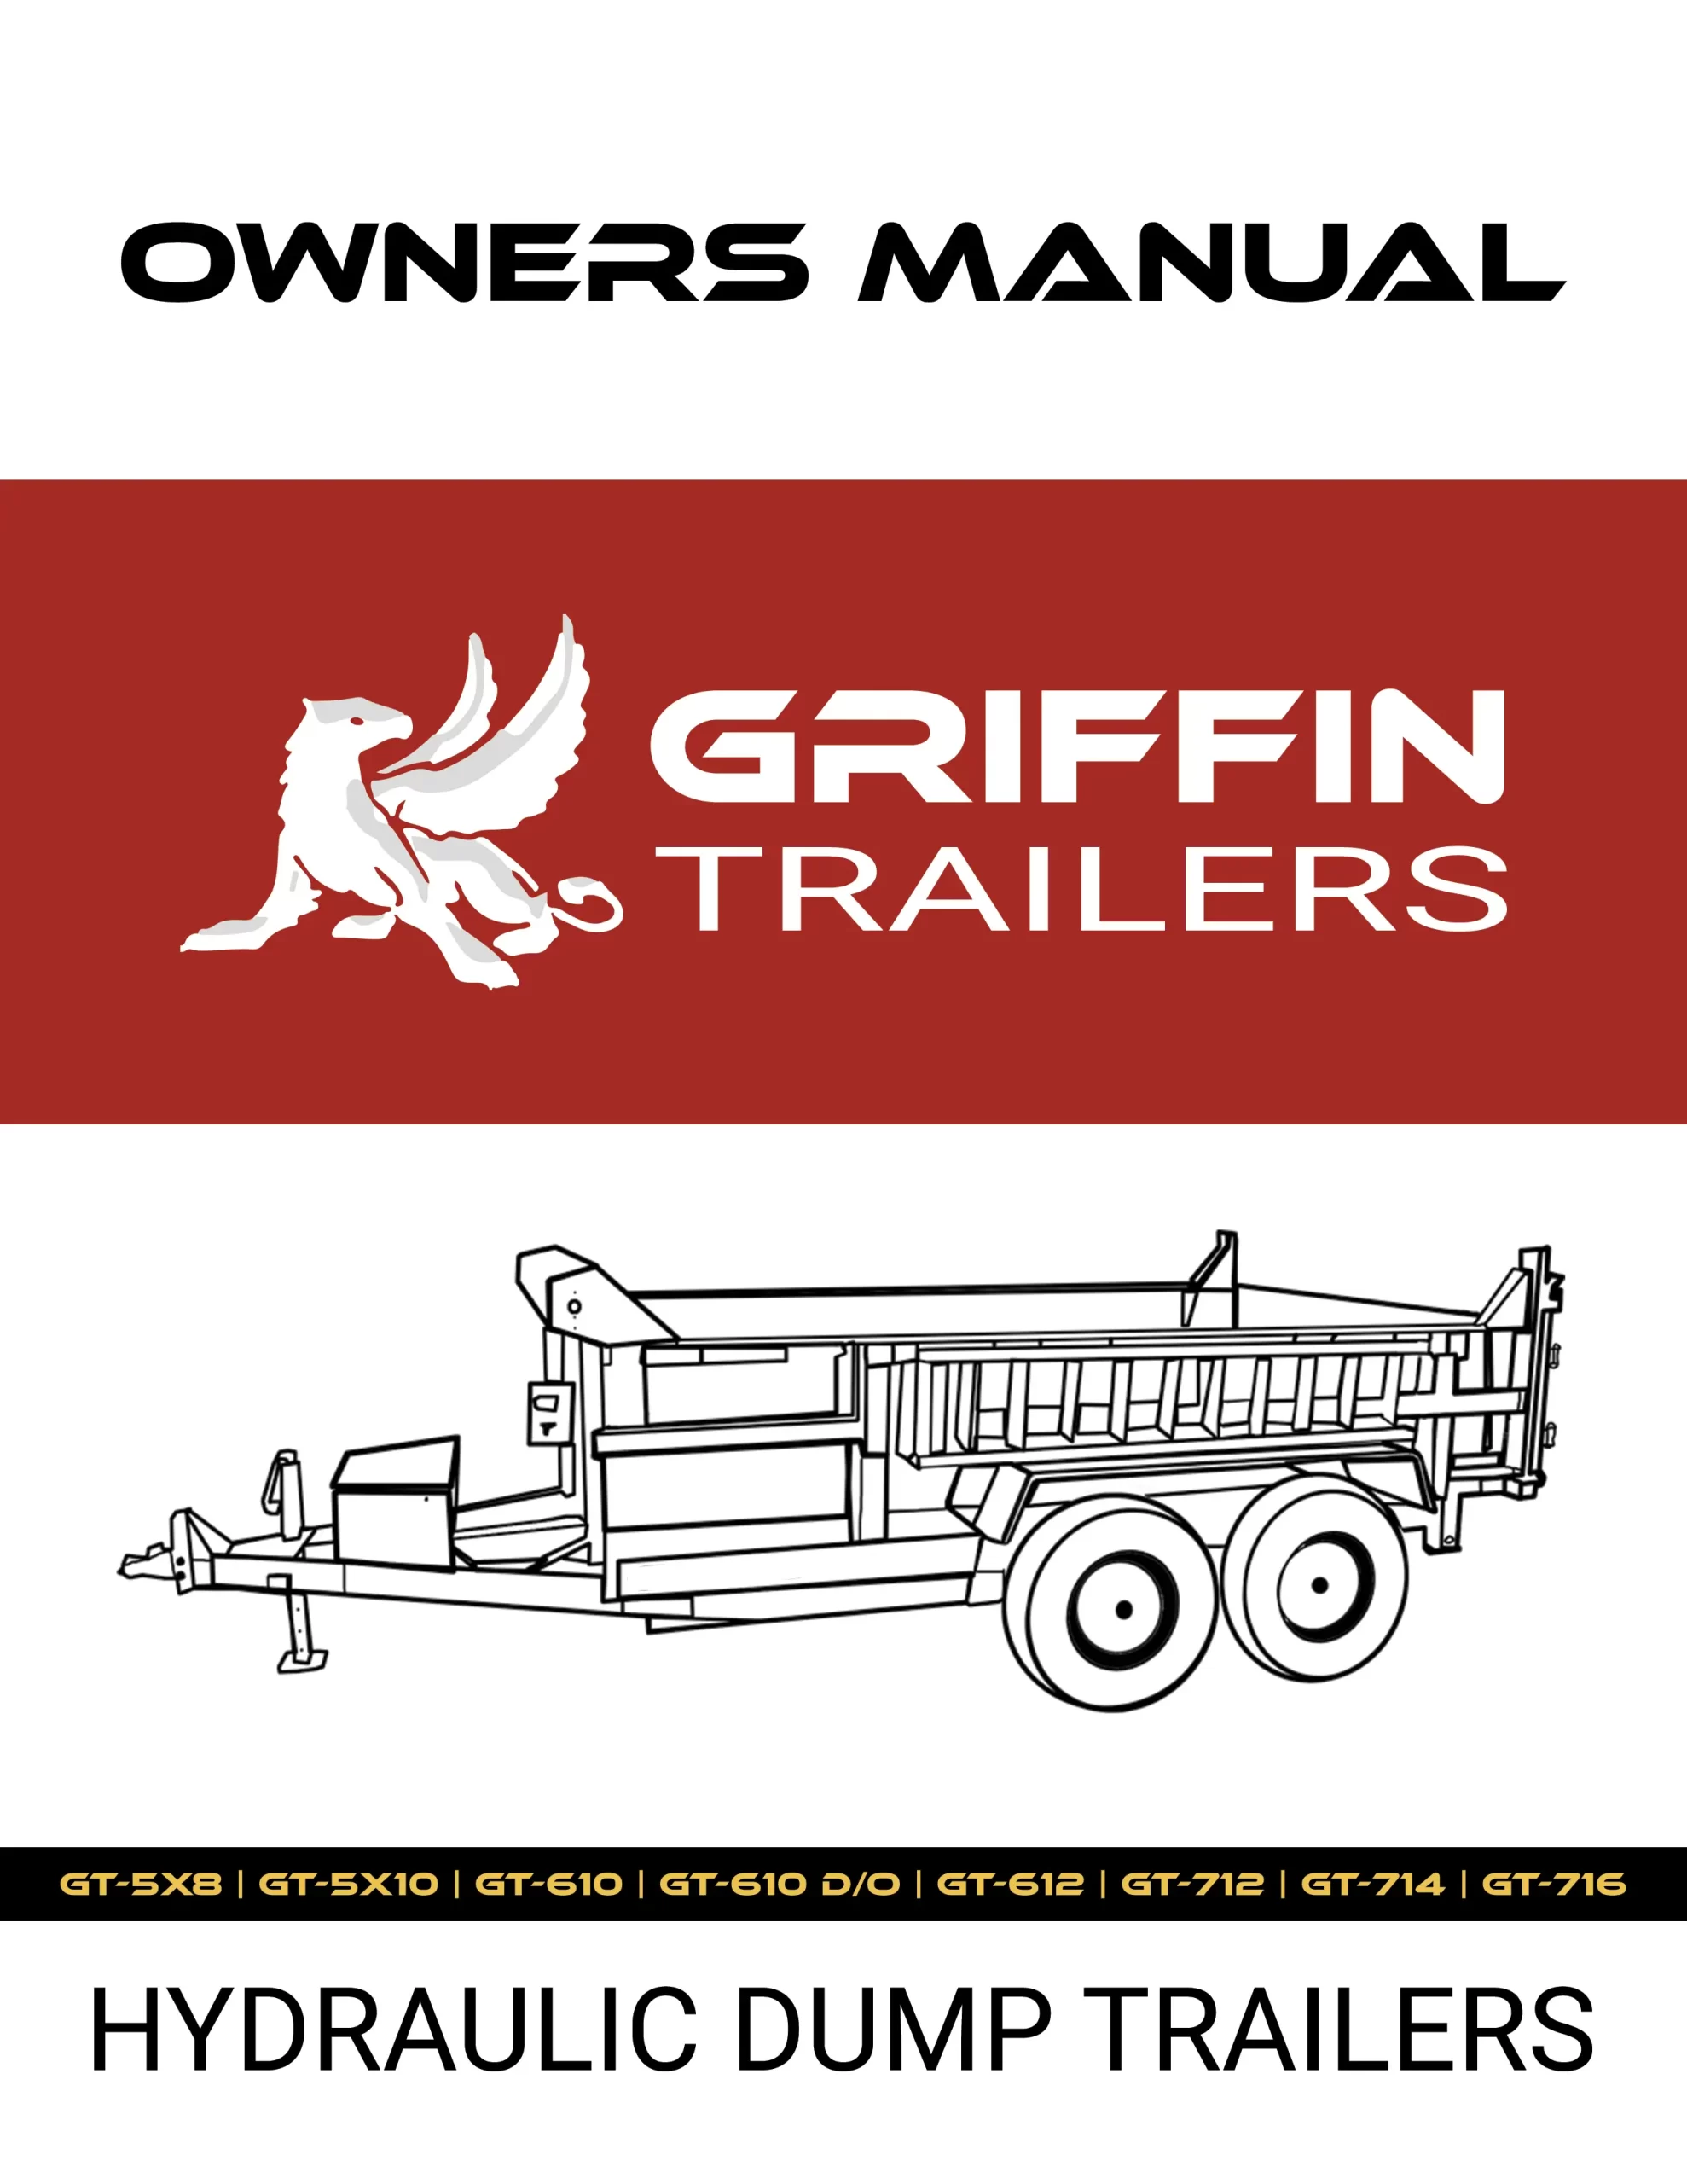 Griffin Trailer Owners Manual